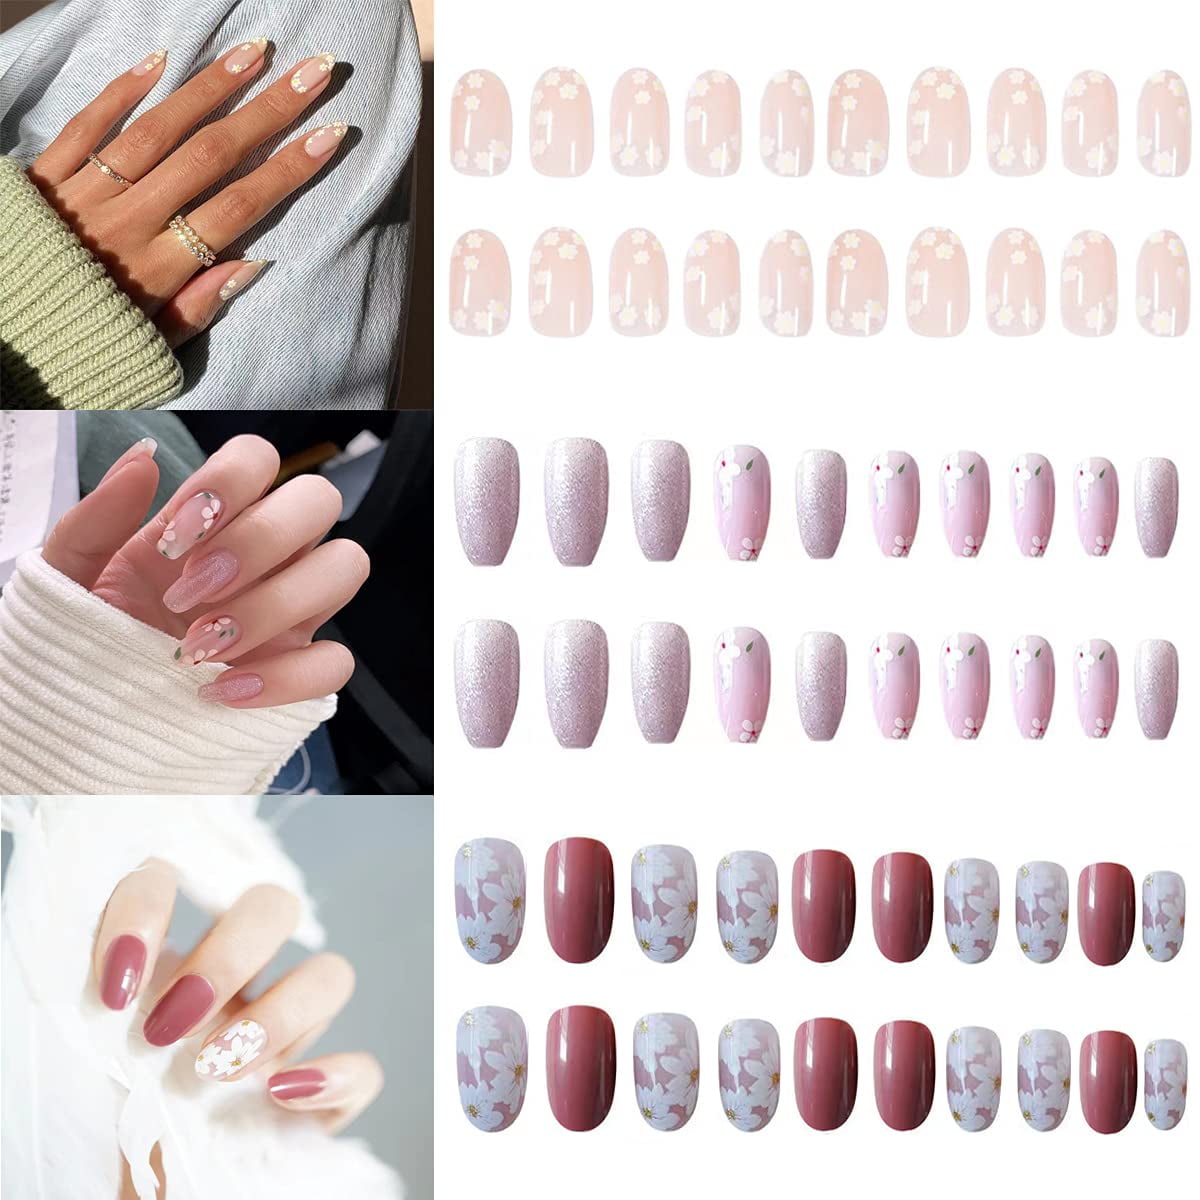 3 Packs (72 Pcs) Short Almond Press on Nails Medium Length, Acrylic Fake  Nails, Cute Flower Design Glossy Full Cover Set Short Press on Nails with  Glue and File for Women and